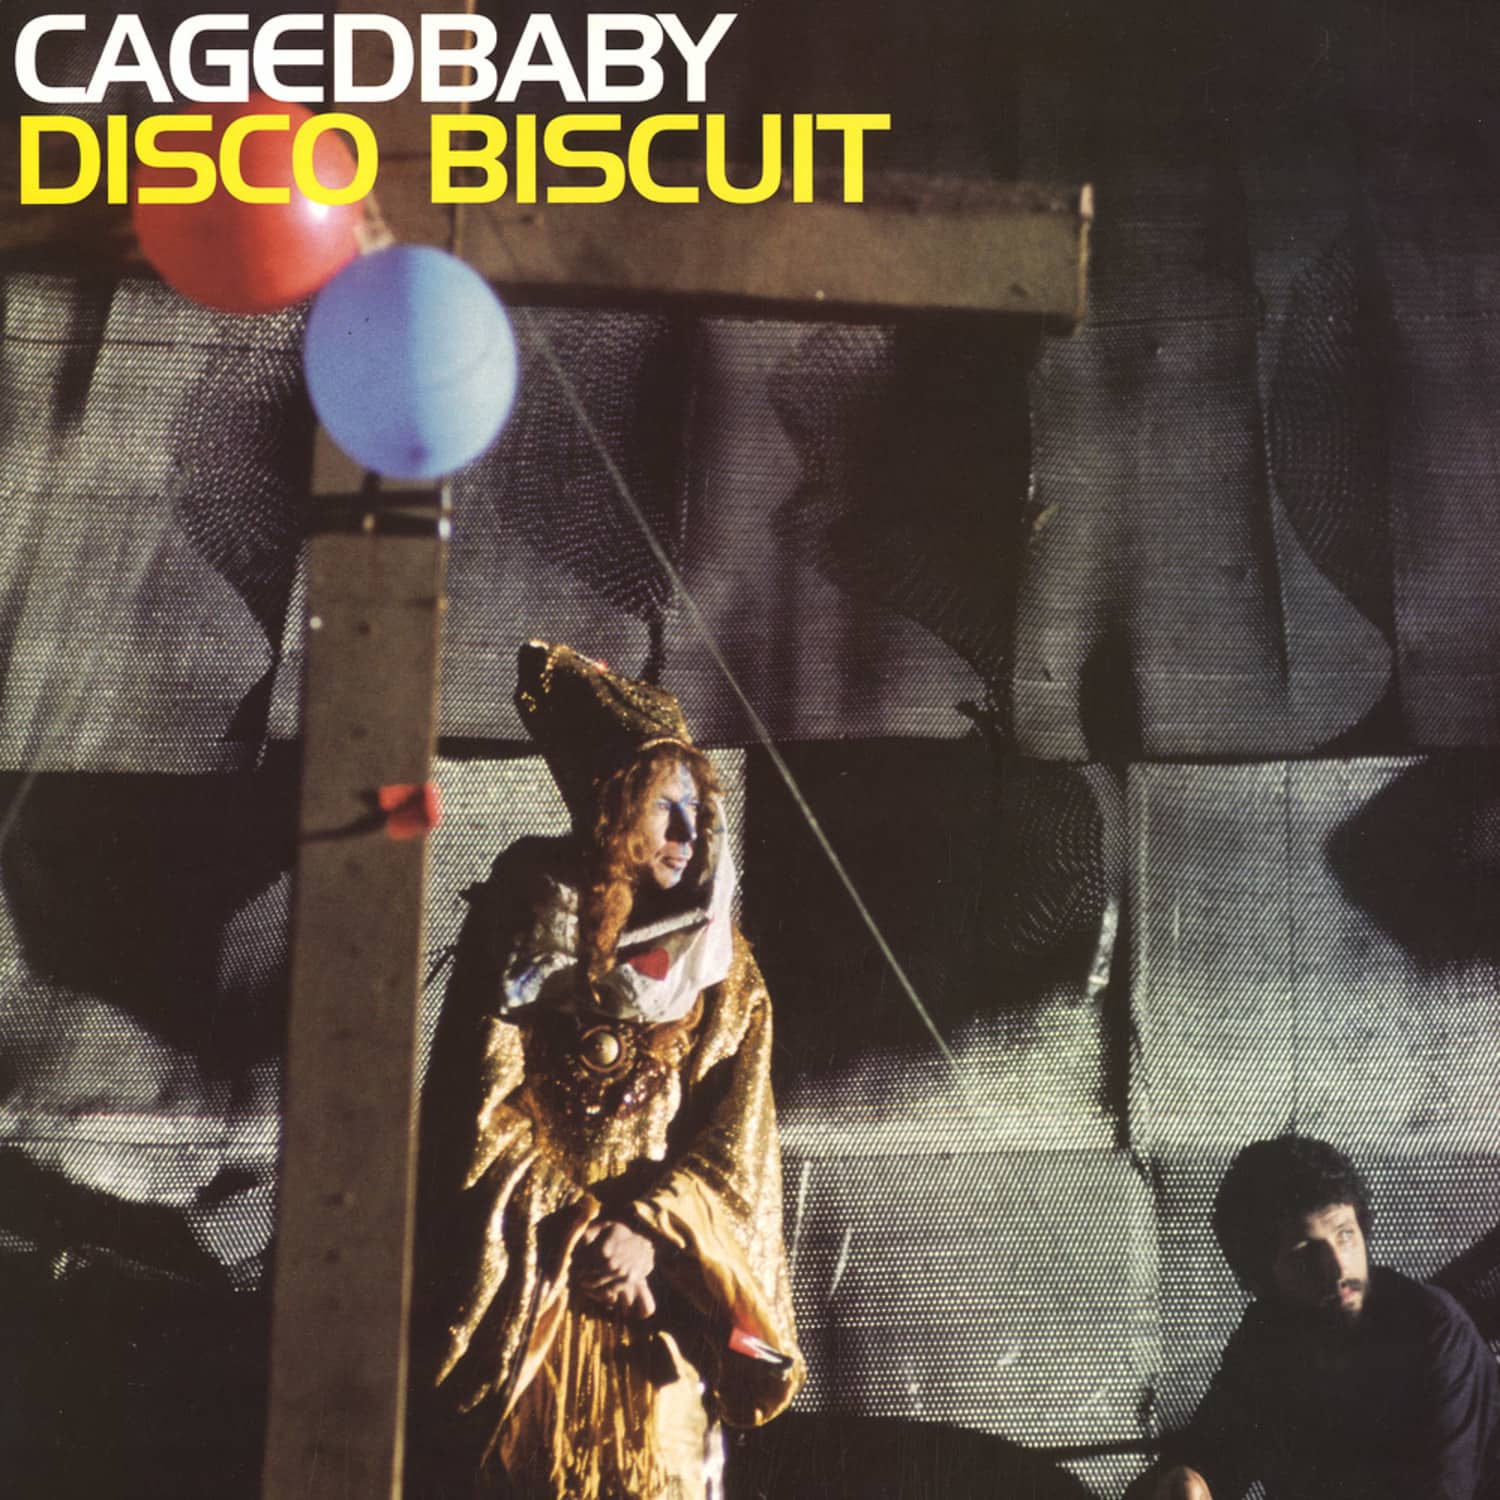 CAGEDBABY - DISCO BISCUIT / AGAINST THE WALL